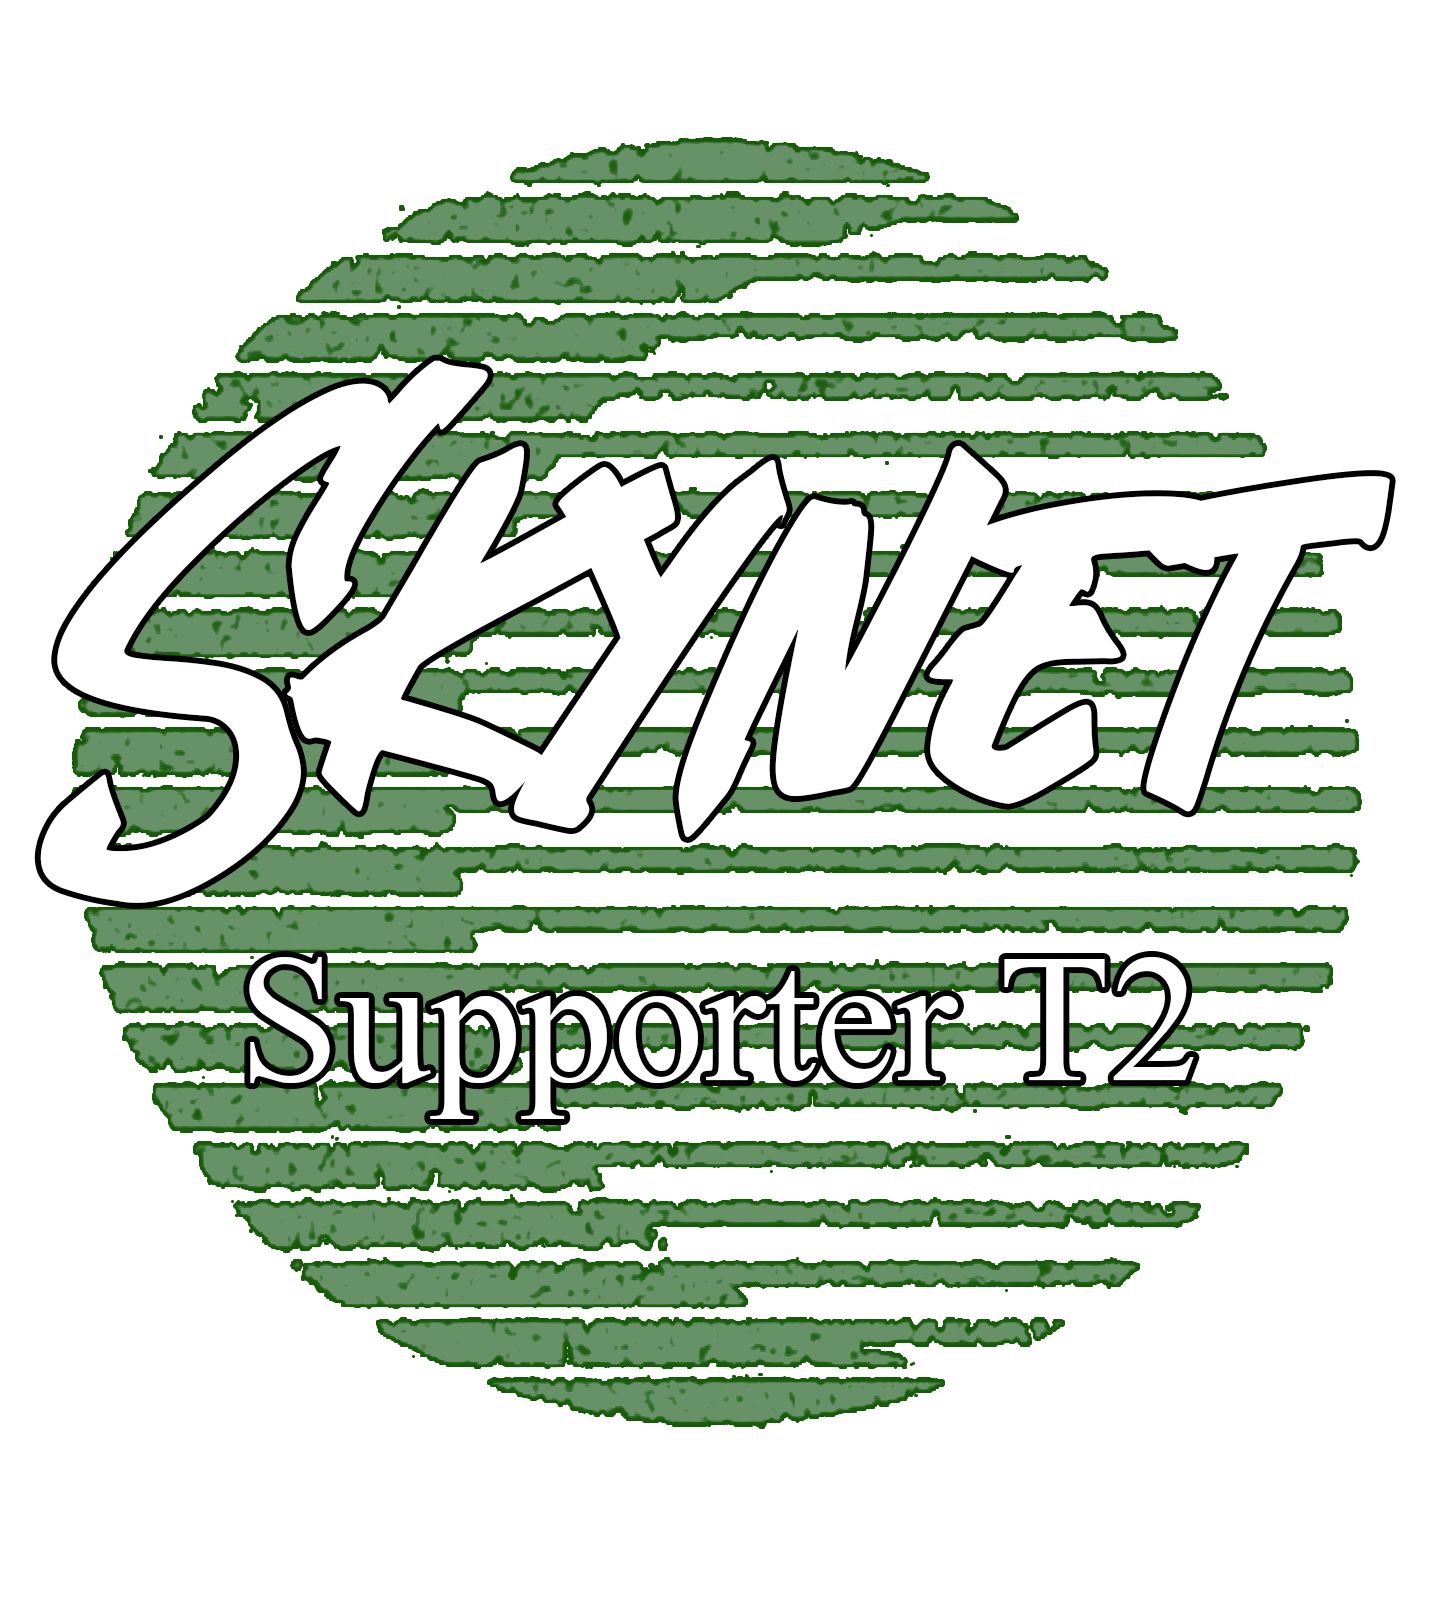 Supporter - T2